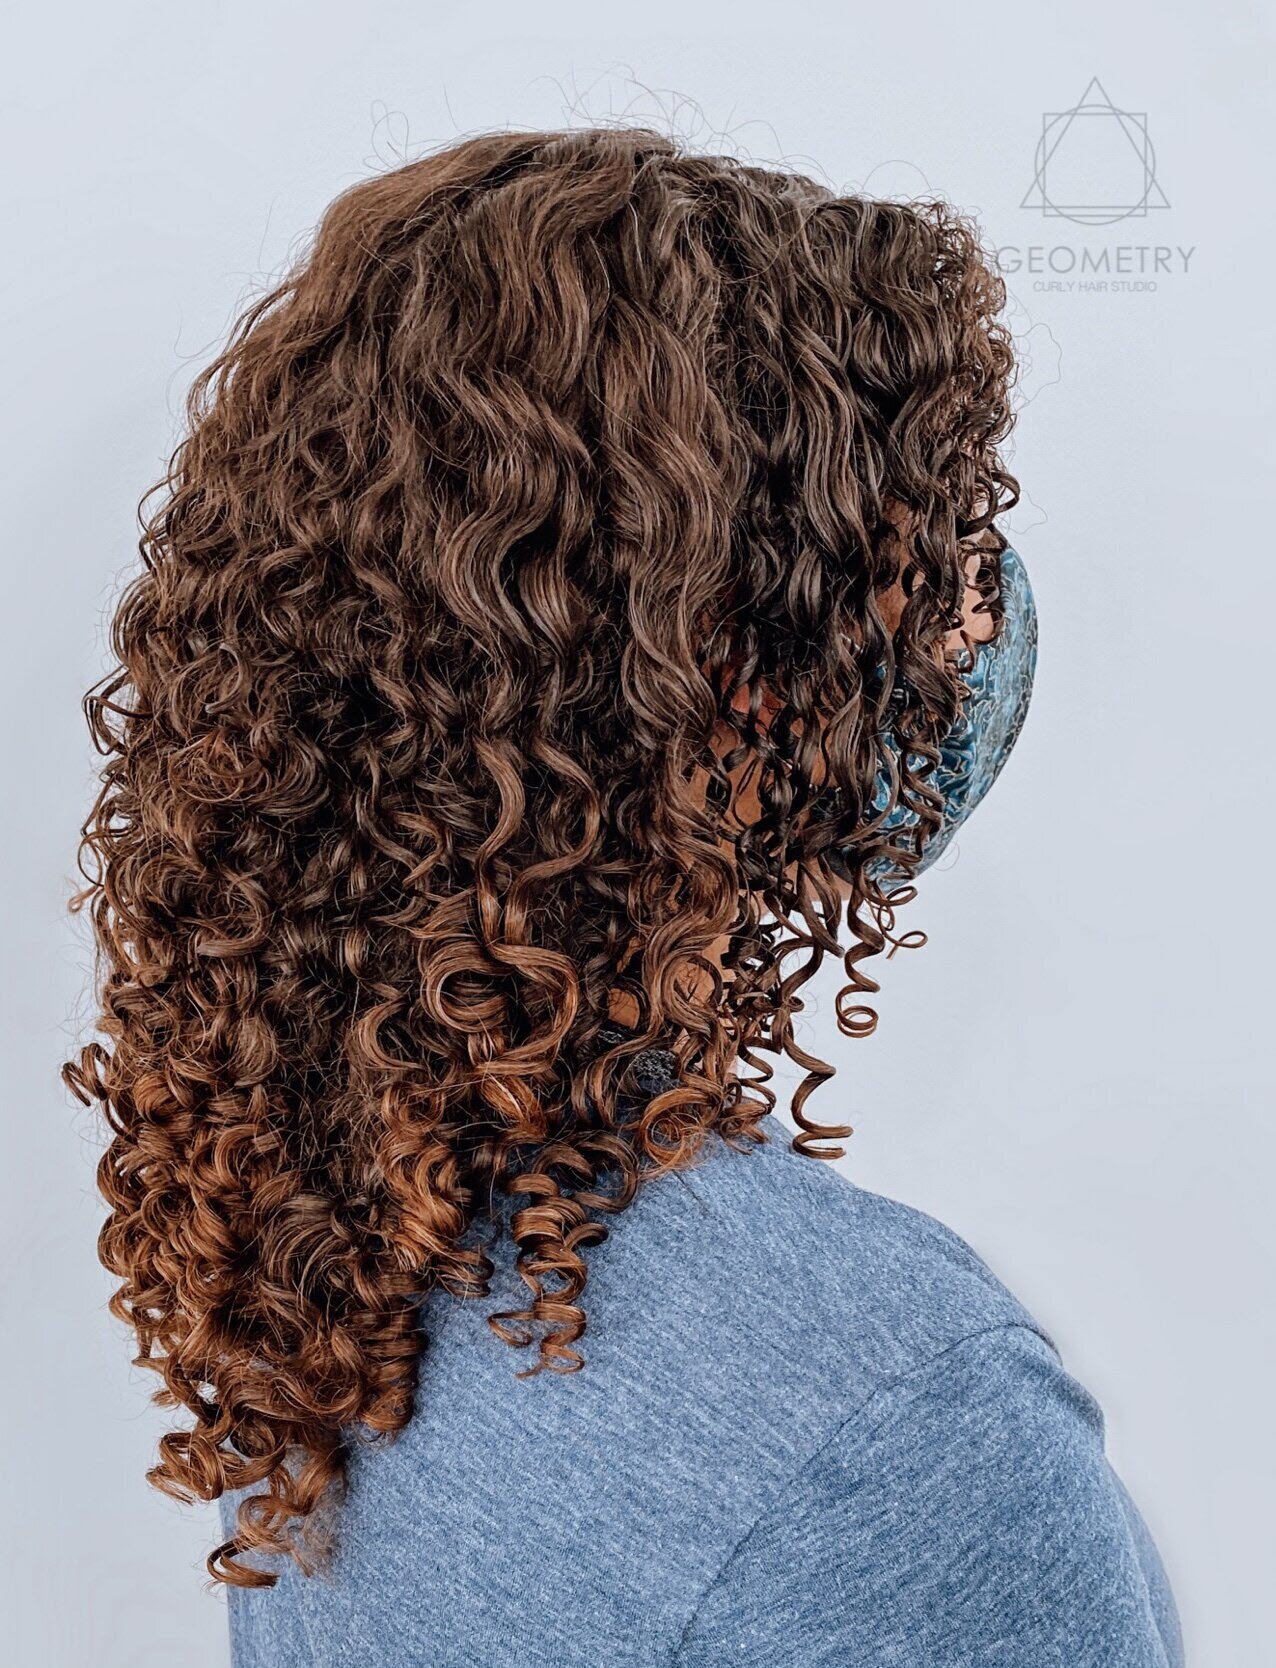 Chestnut brown curly hair color and cut